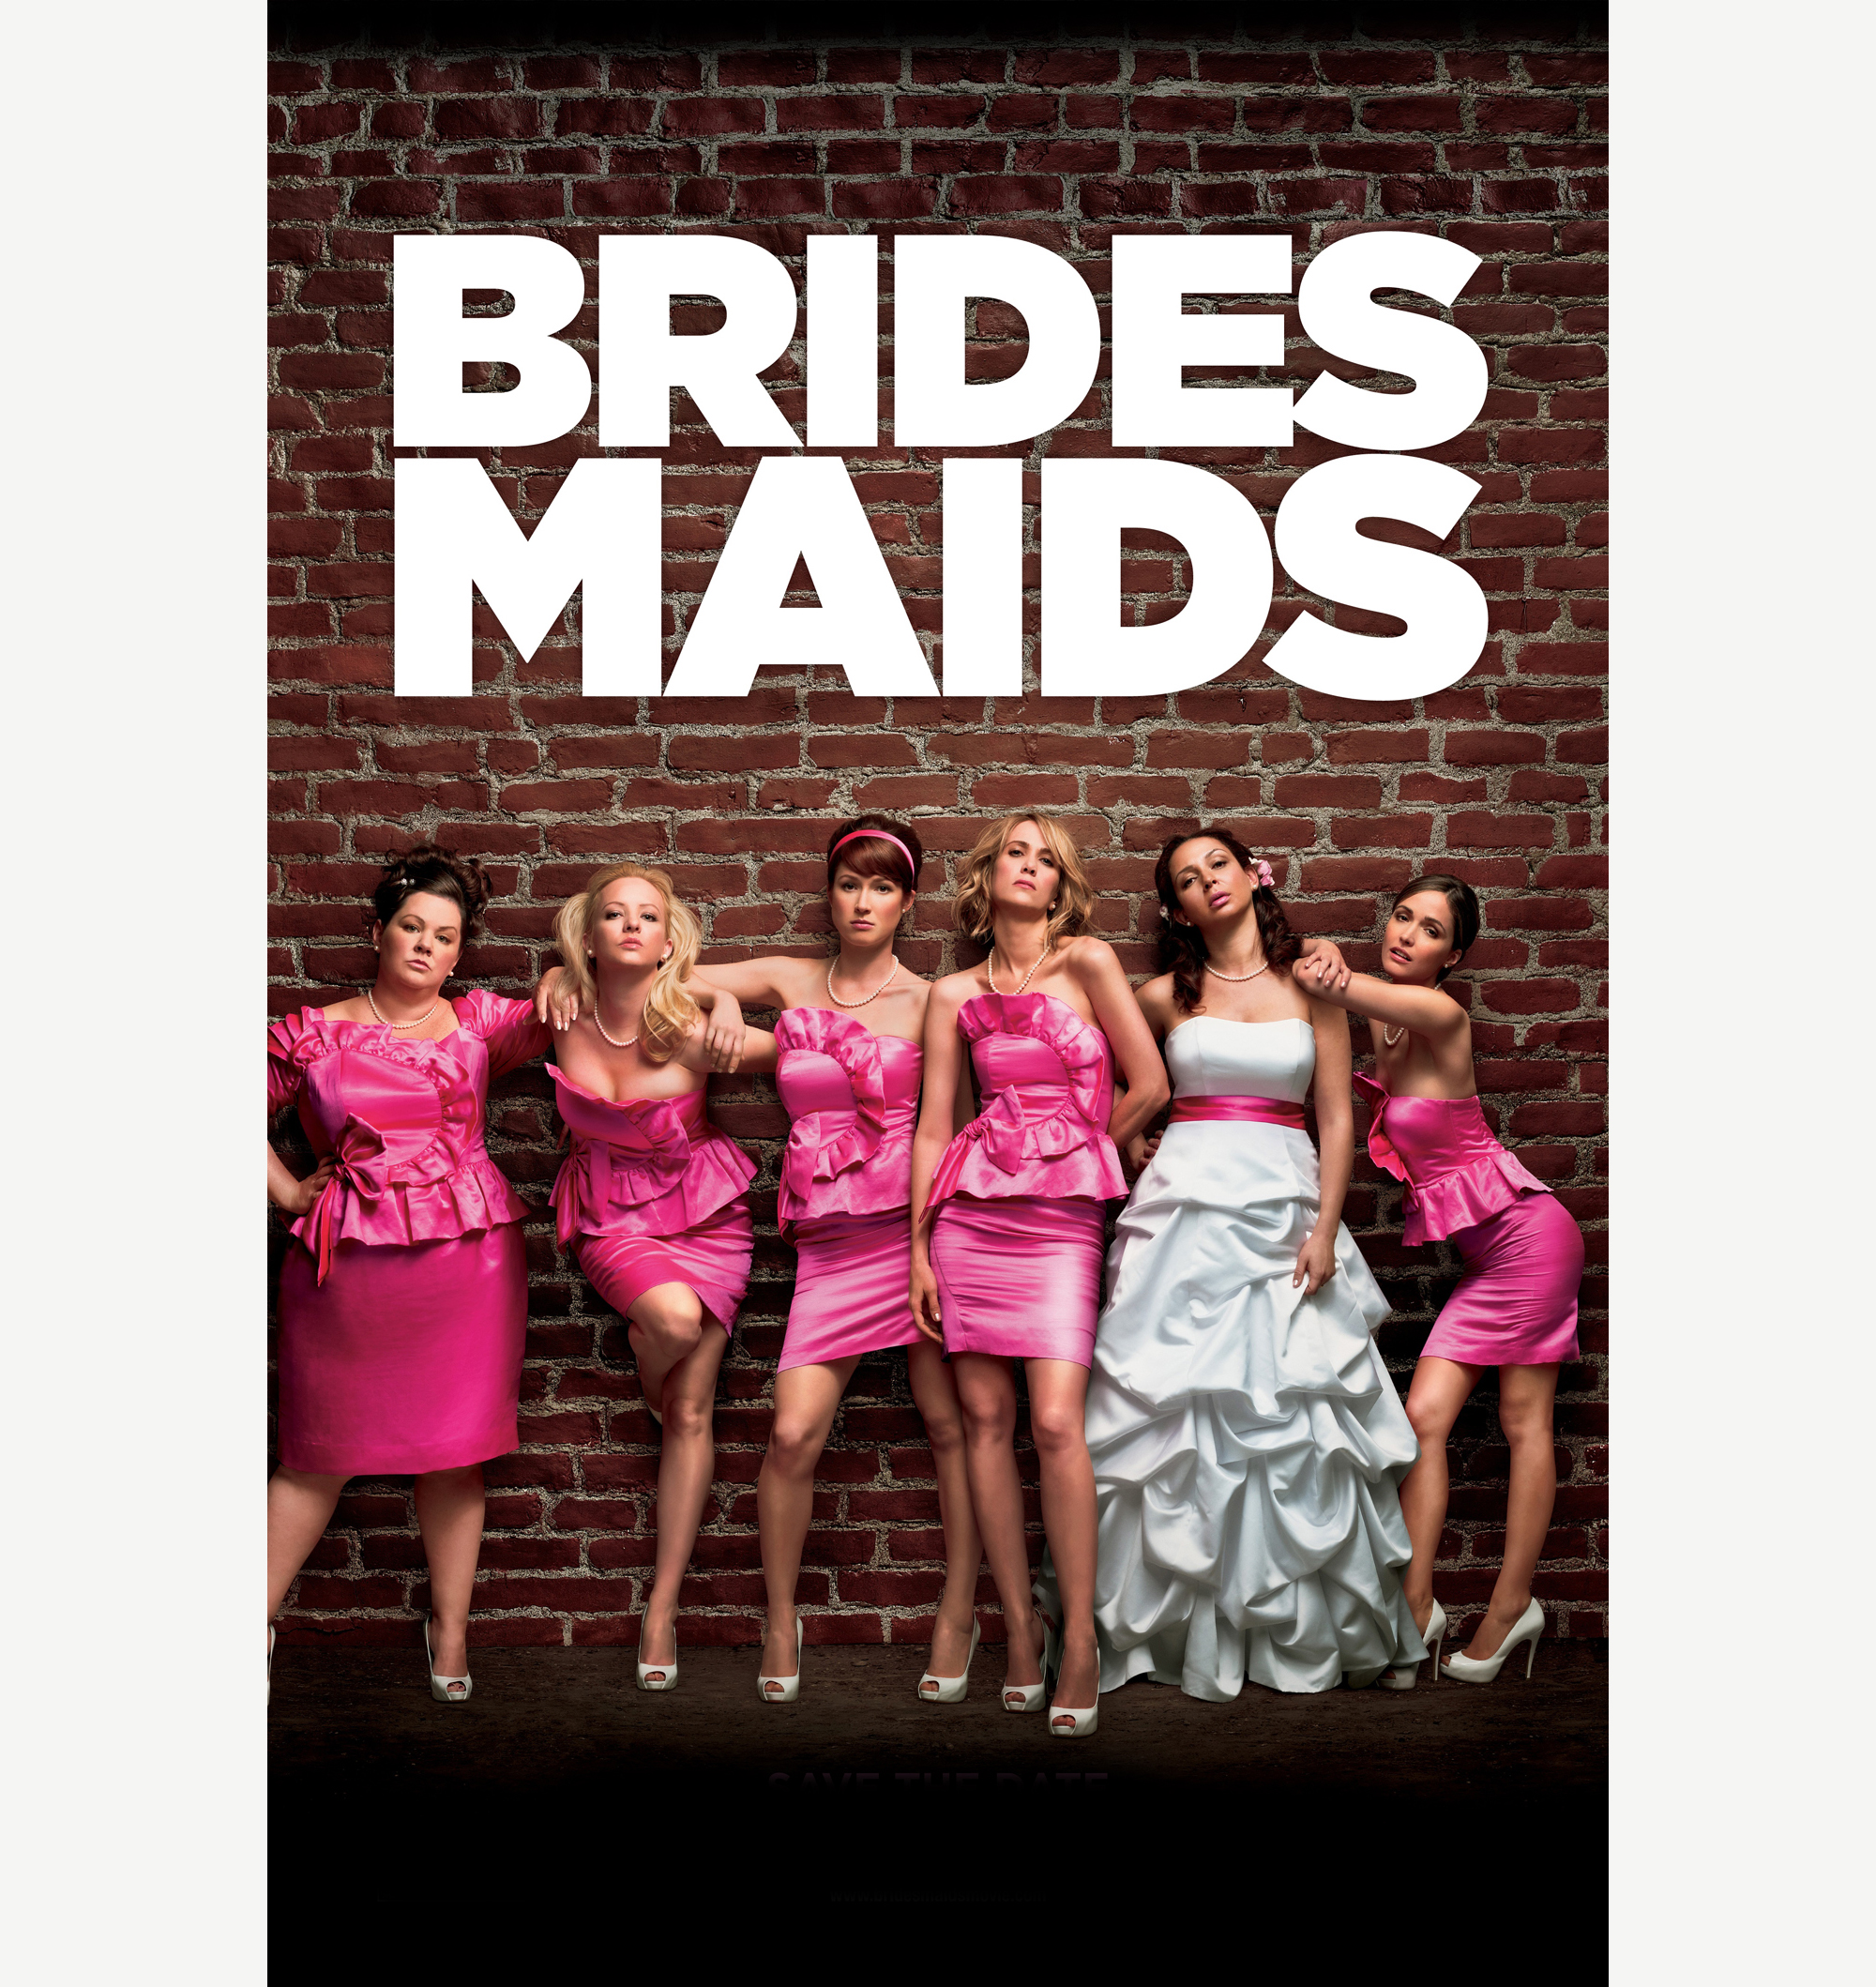 Bridesmaid unrated